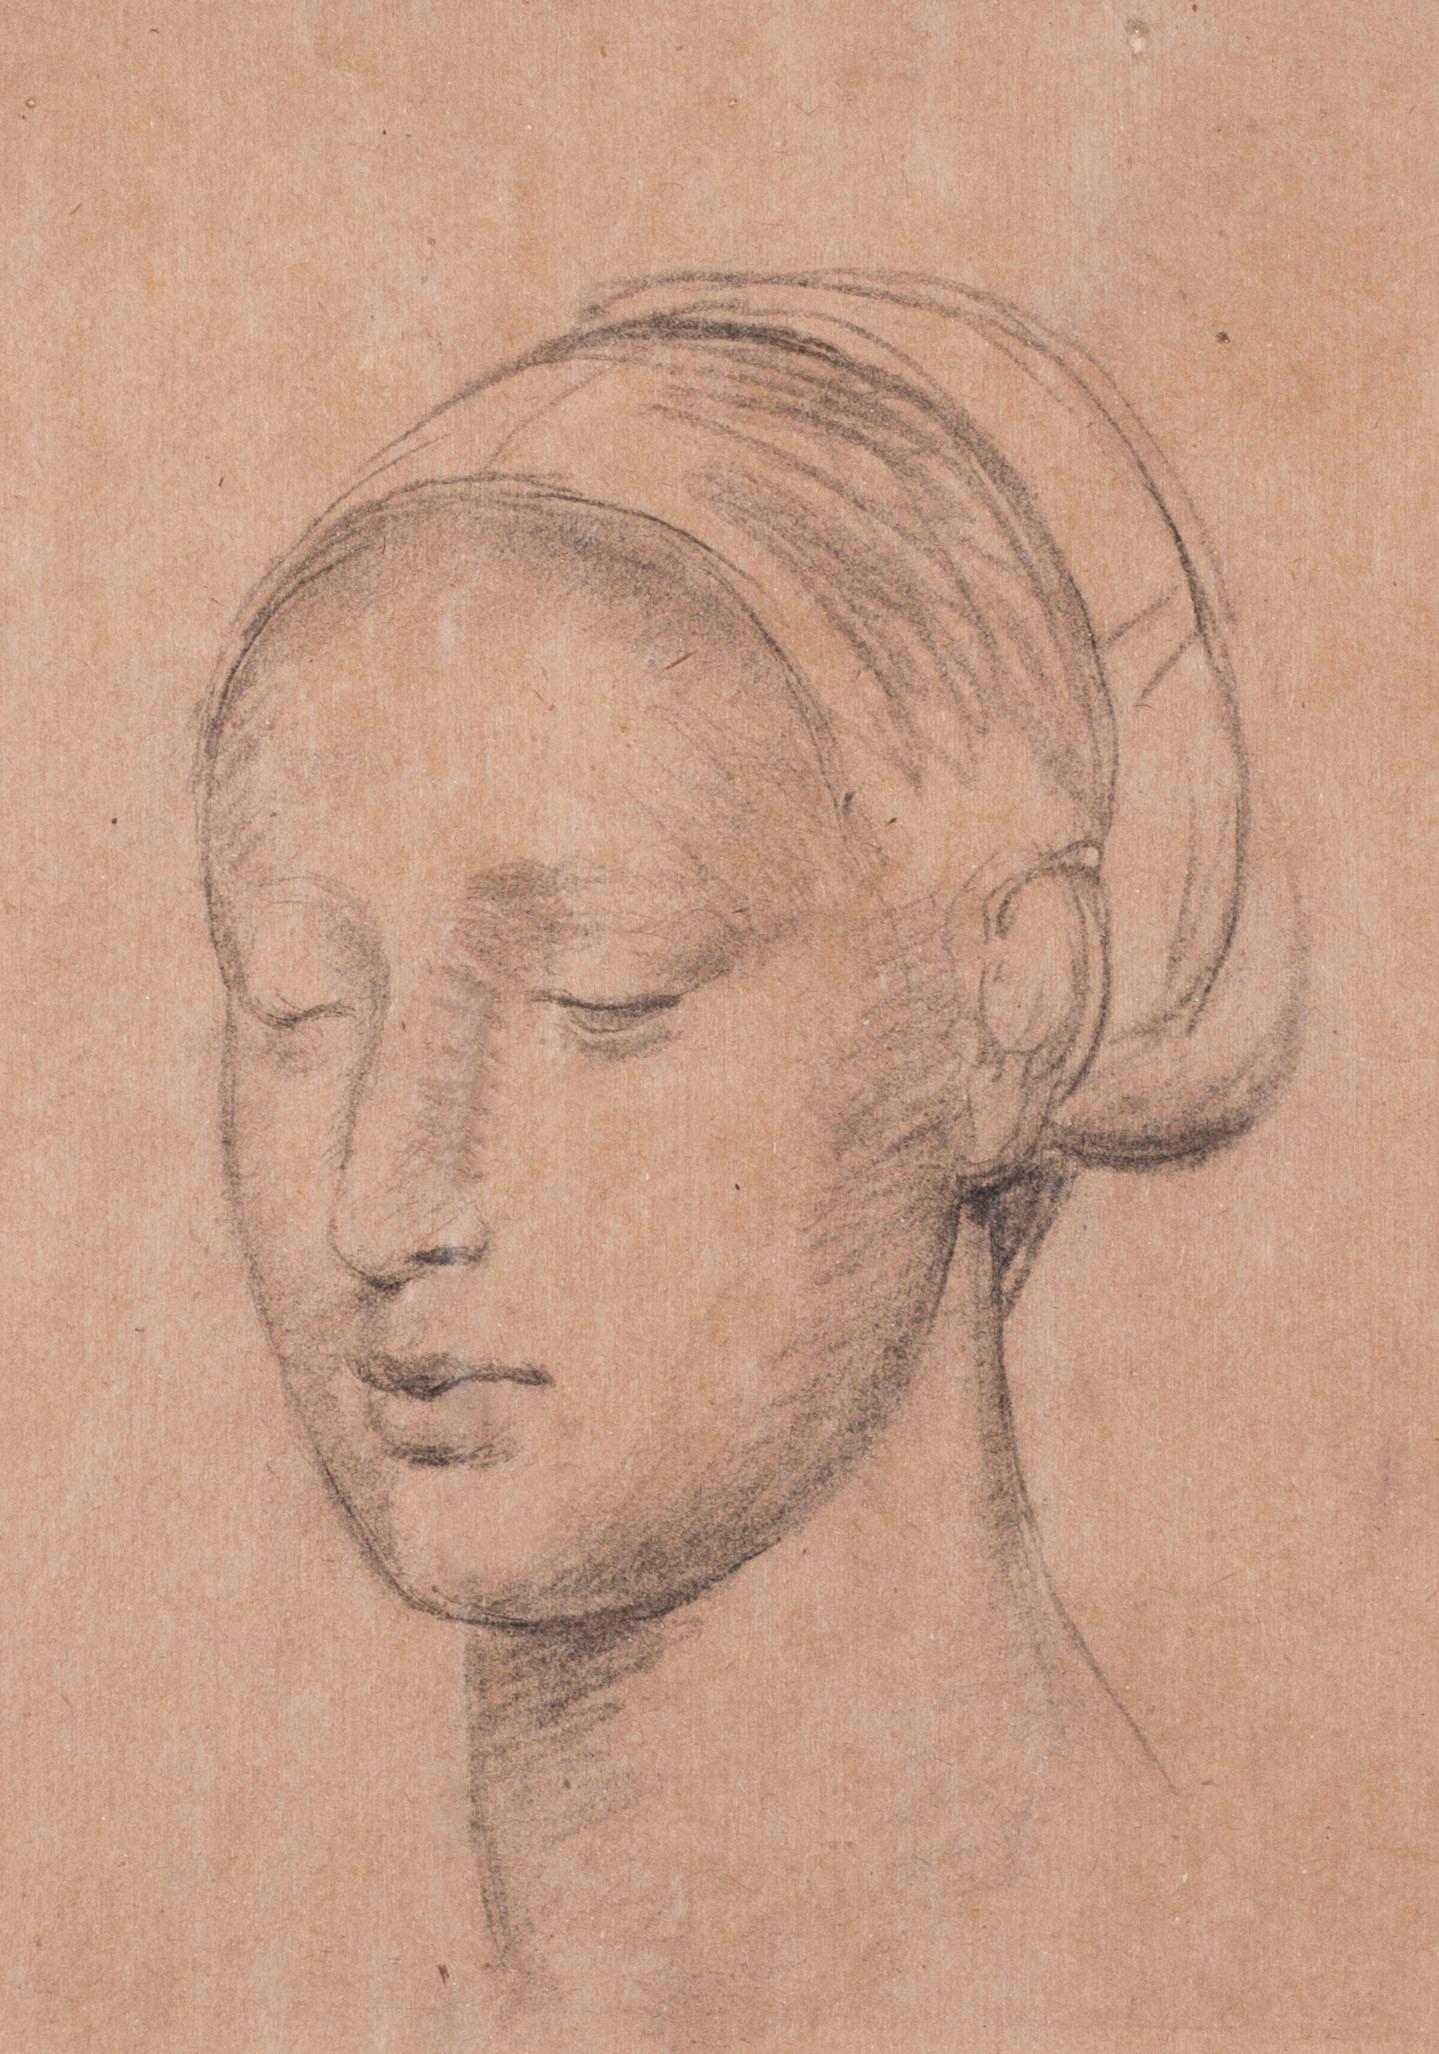 Edward Stott, ARA (British, 1859 - 1918)
Study of a young beauty
Pencil on paper
10.3/8 x 7.1/2 in. (26.3 x 19 cm.)

Provenance: Abbott and Holder, London

A few years after its foundation in 1886, a critic referred to the New English Art Club as